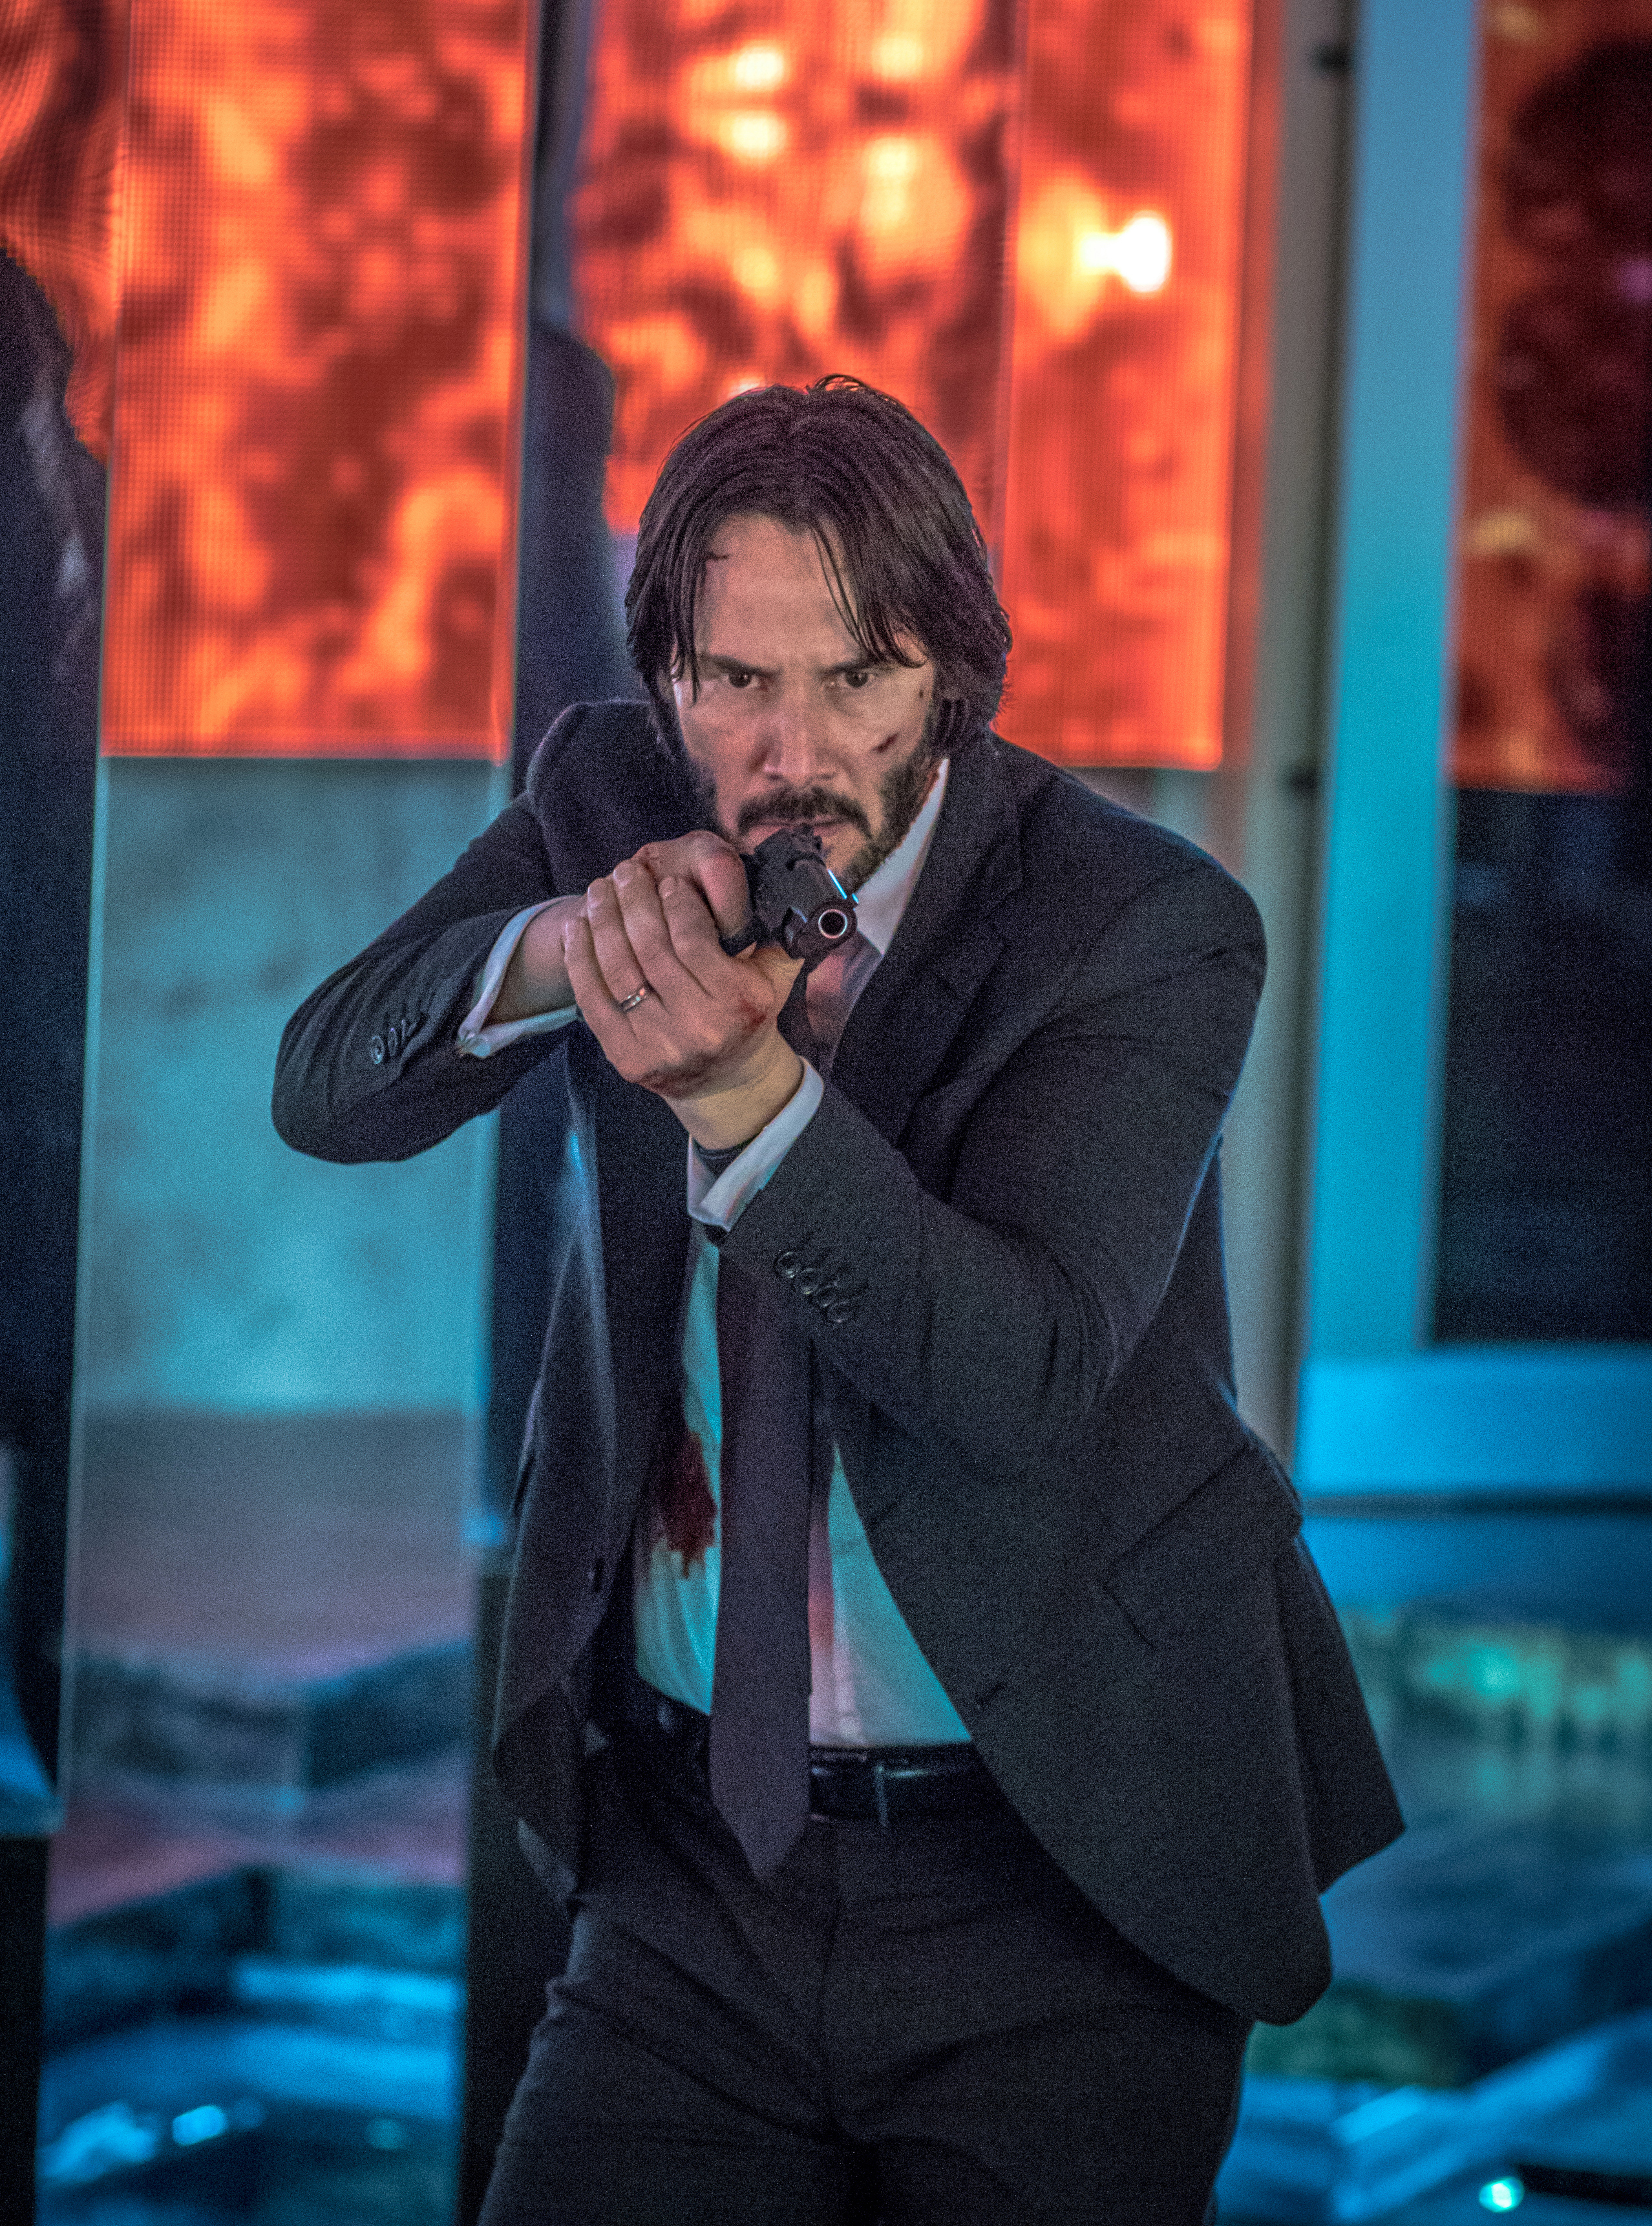  Keanu Reeves stars as &lsquo;John Wick&rsquo; in JOHN WICK: CHAPTER 2. Photo Credit: Niko Tavernise 